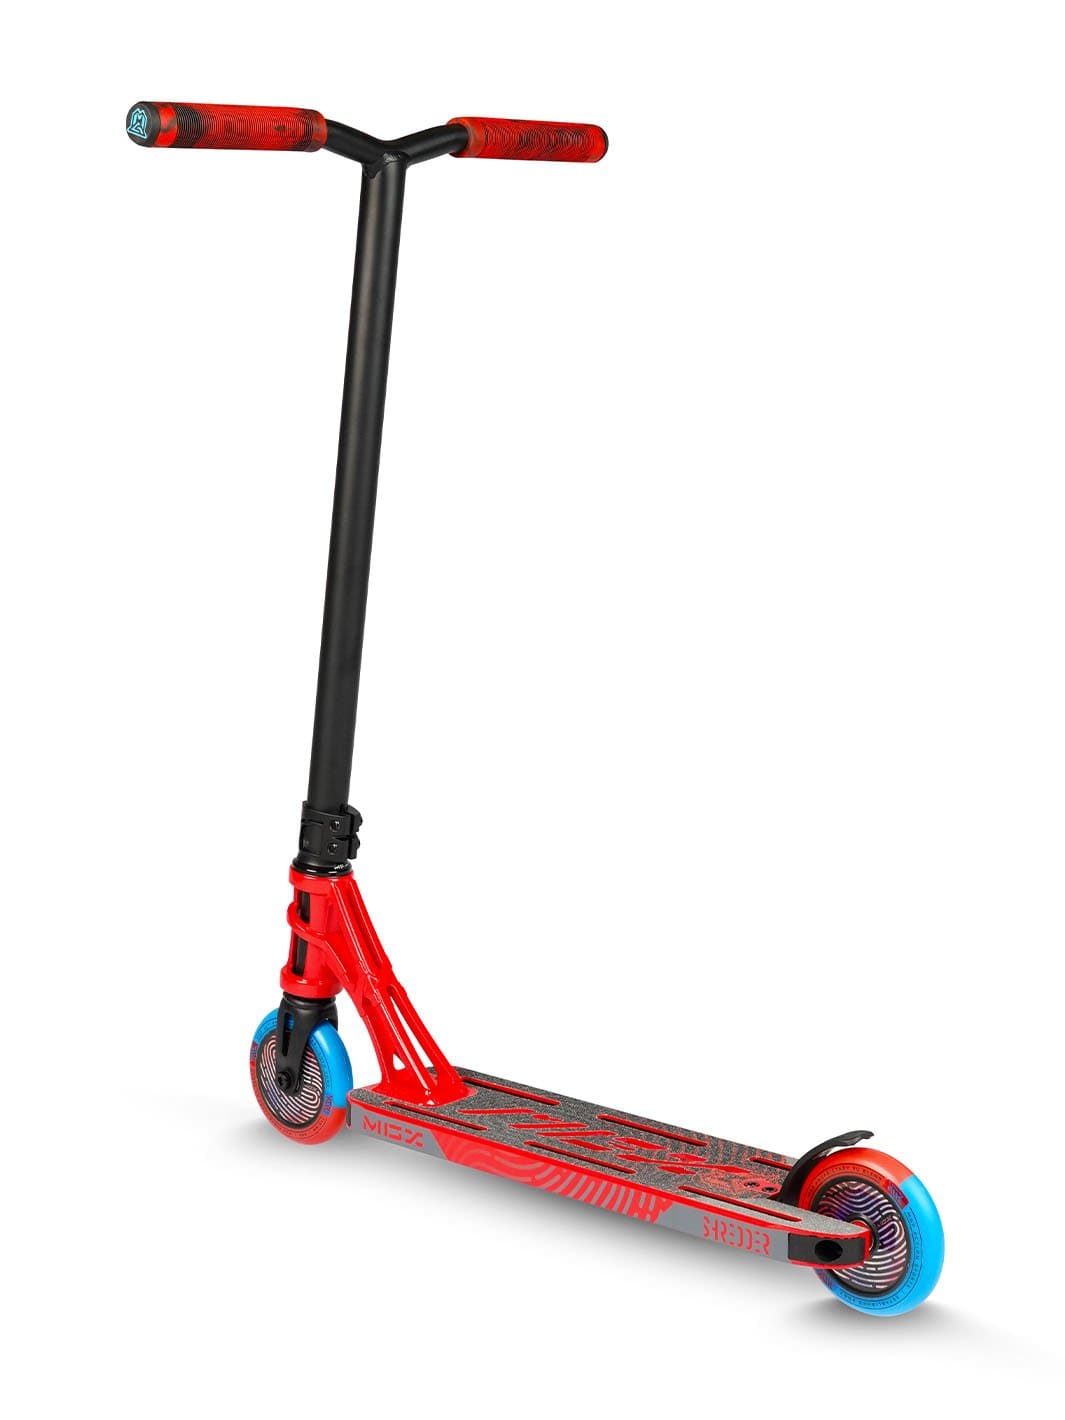 MGP MGX S1 Complete High Quality Razor Jetson Stunt Scooter Red Blue